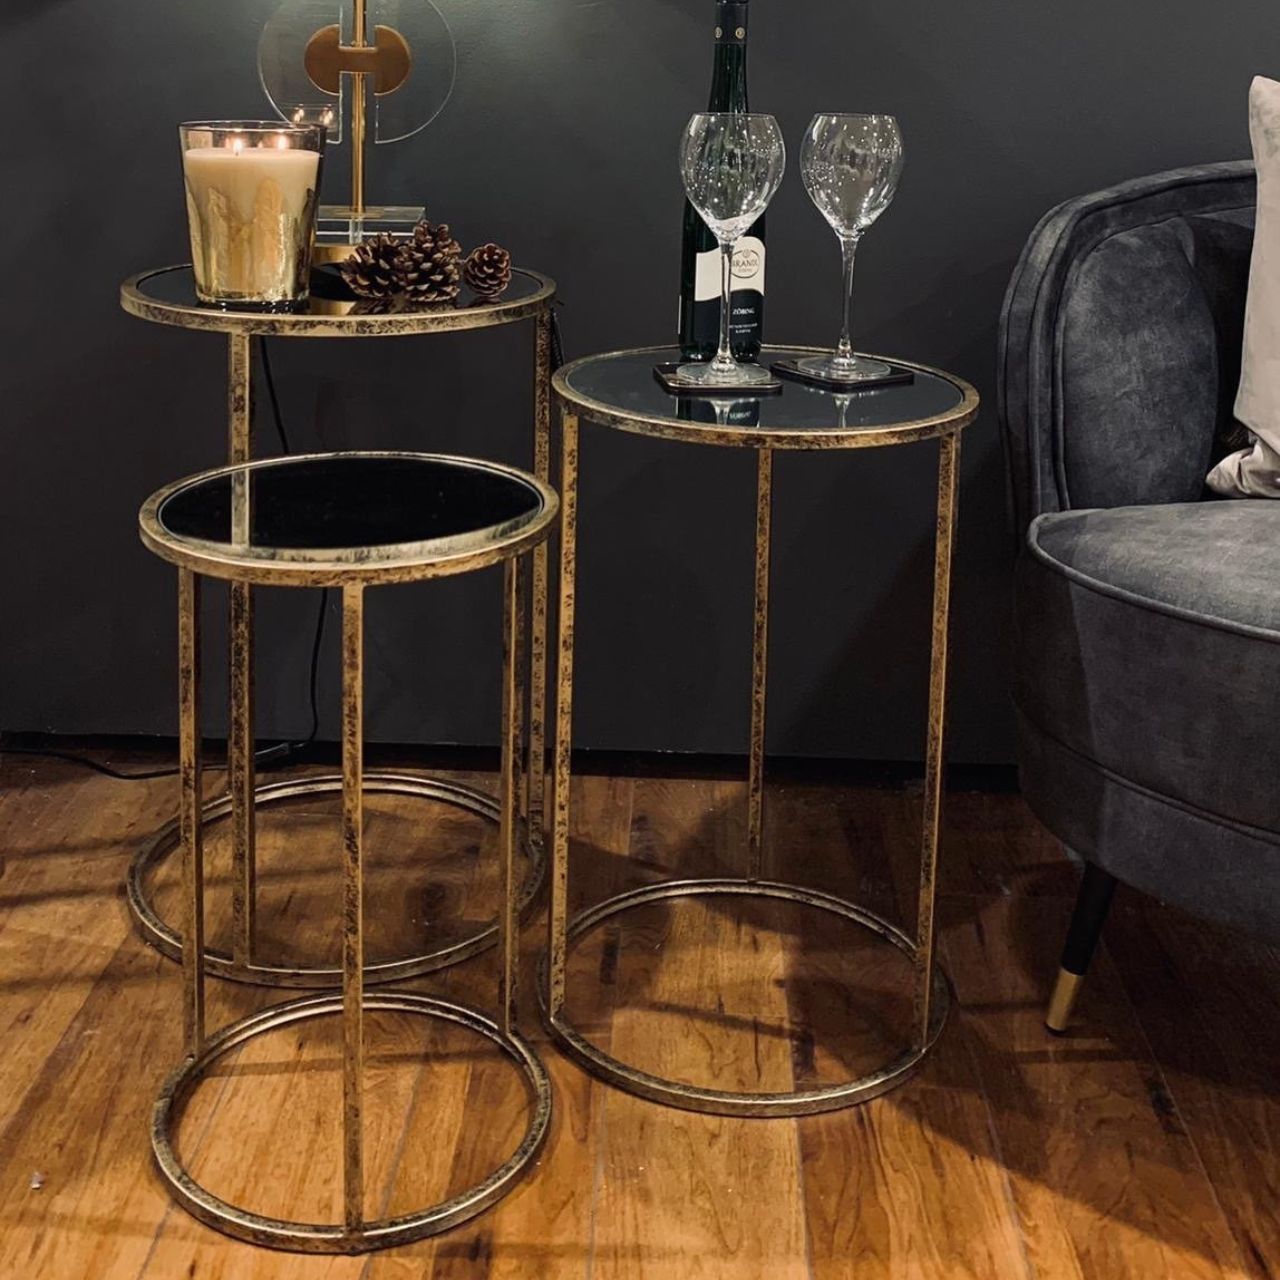 Mindy Brownes Mirror Top Nest of Tables Set of 3  Three Pod Tables that neatly stack on top of one another. Champagne gold colour in finish and a mirror top. A beautiful addition to any home. These tables only stack on top of one another, or side by side, underneath bars should not be crossed. 